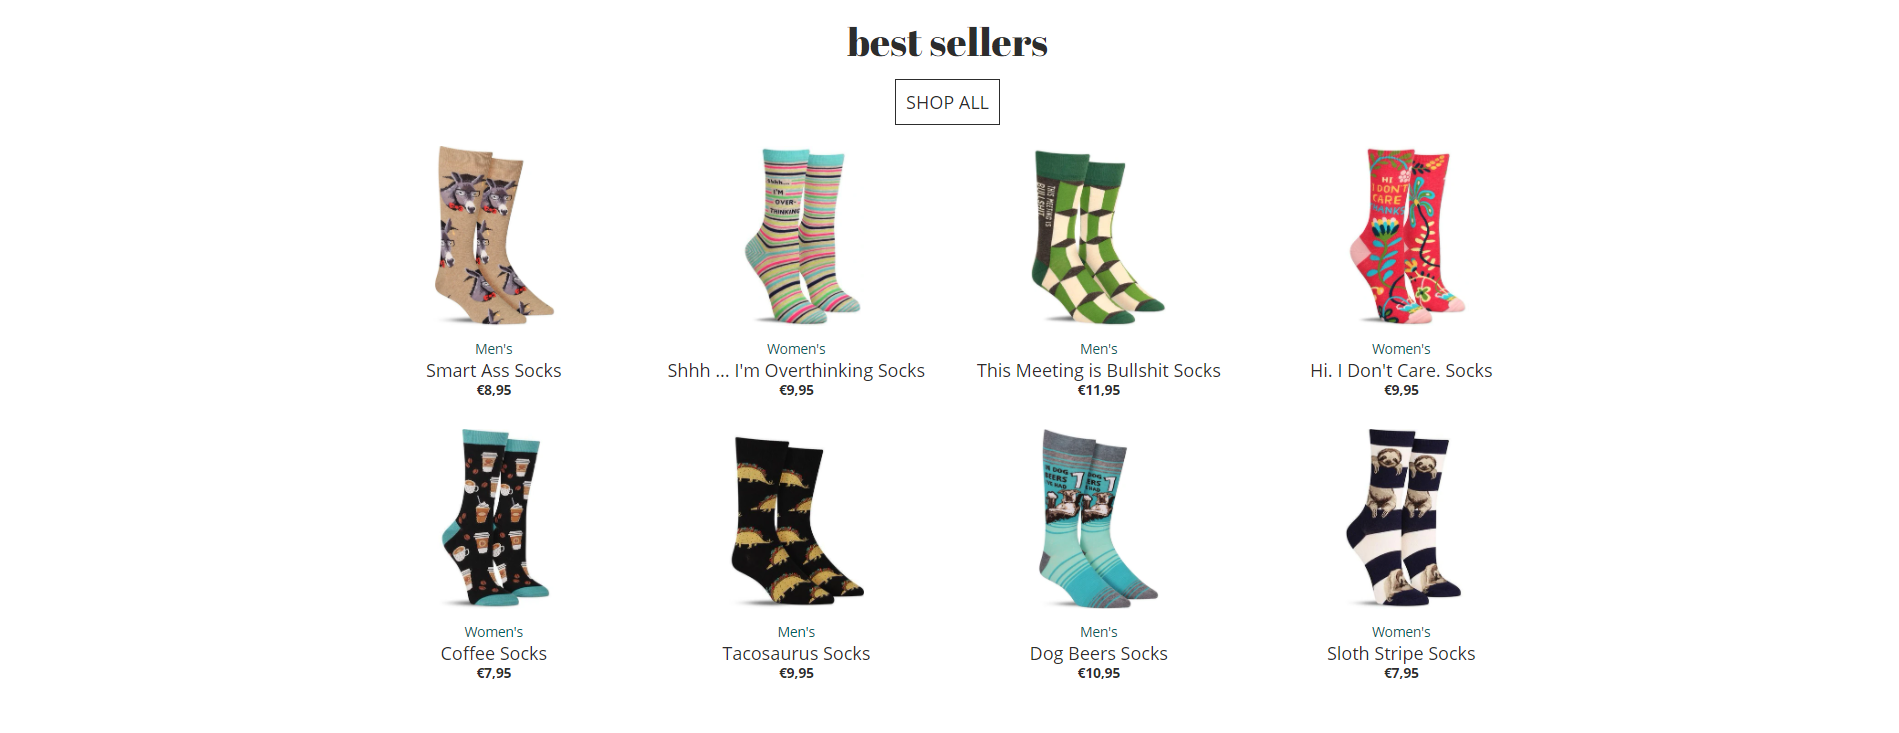 A Findify widget operating for client The Sock Drawer, promoting 'Best Sellers'.